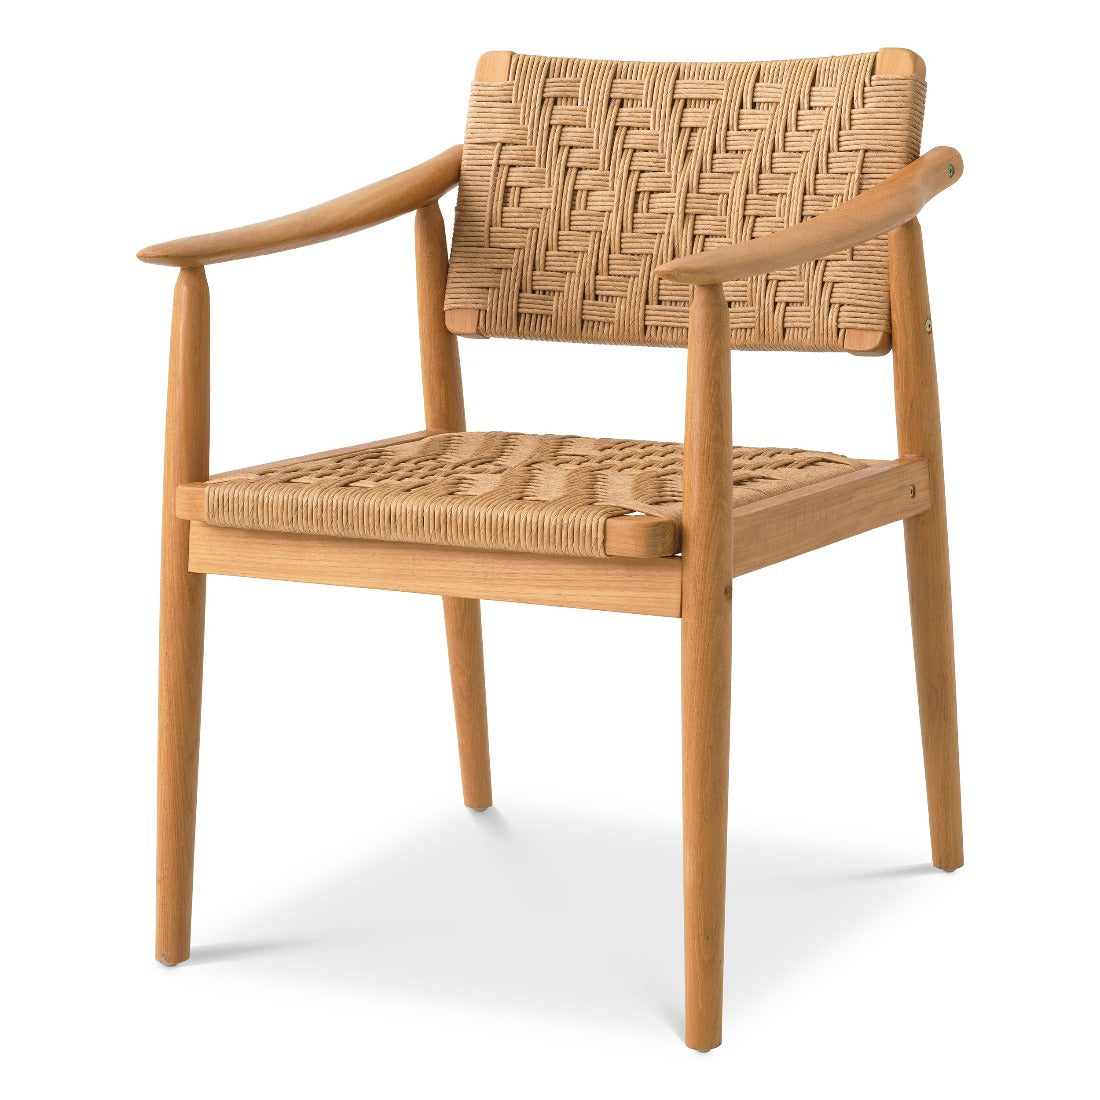 Outdoor dining chair Eichholtz Coral Bay Naturel set of 2